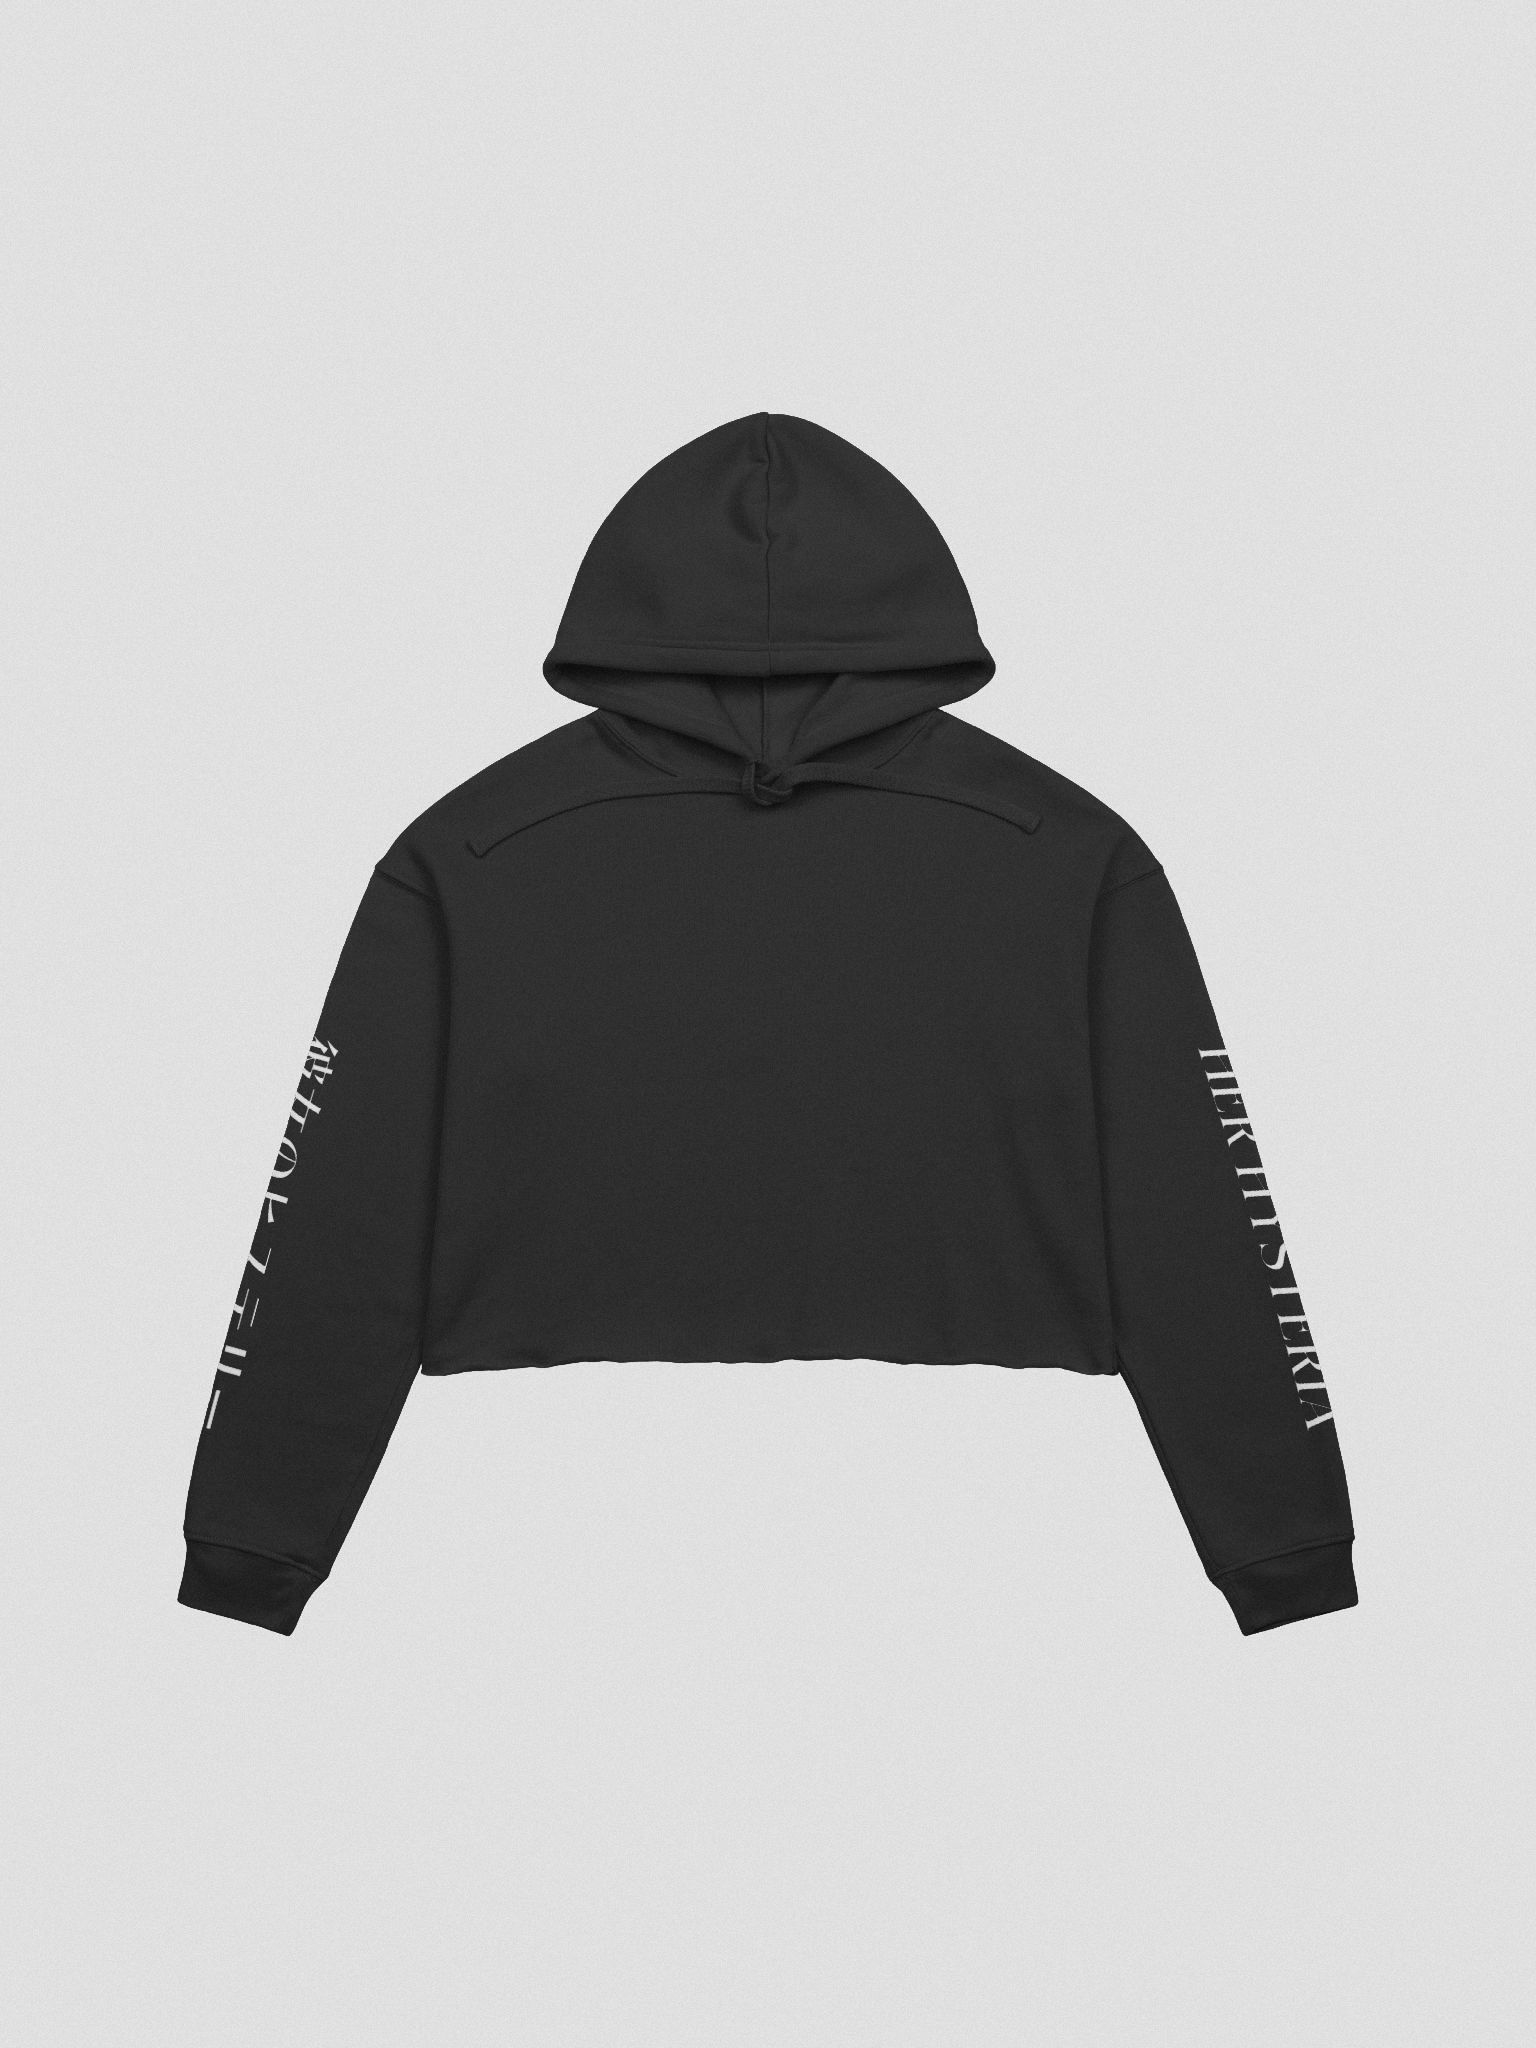 Hysteria Cropped Hoodie